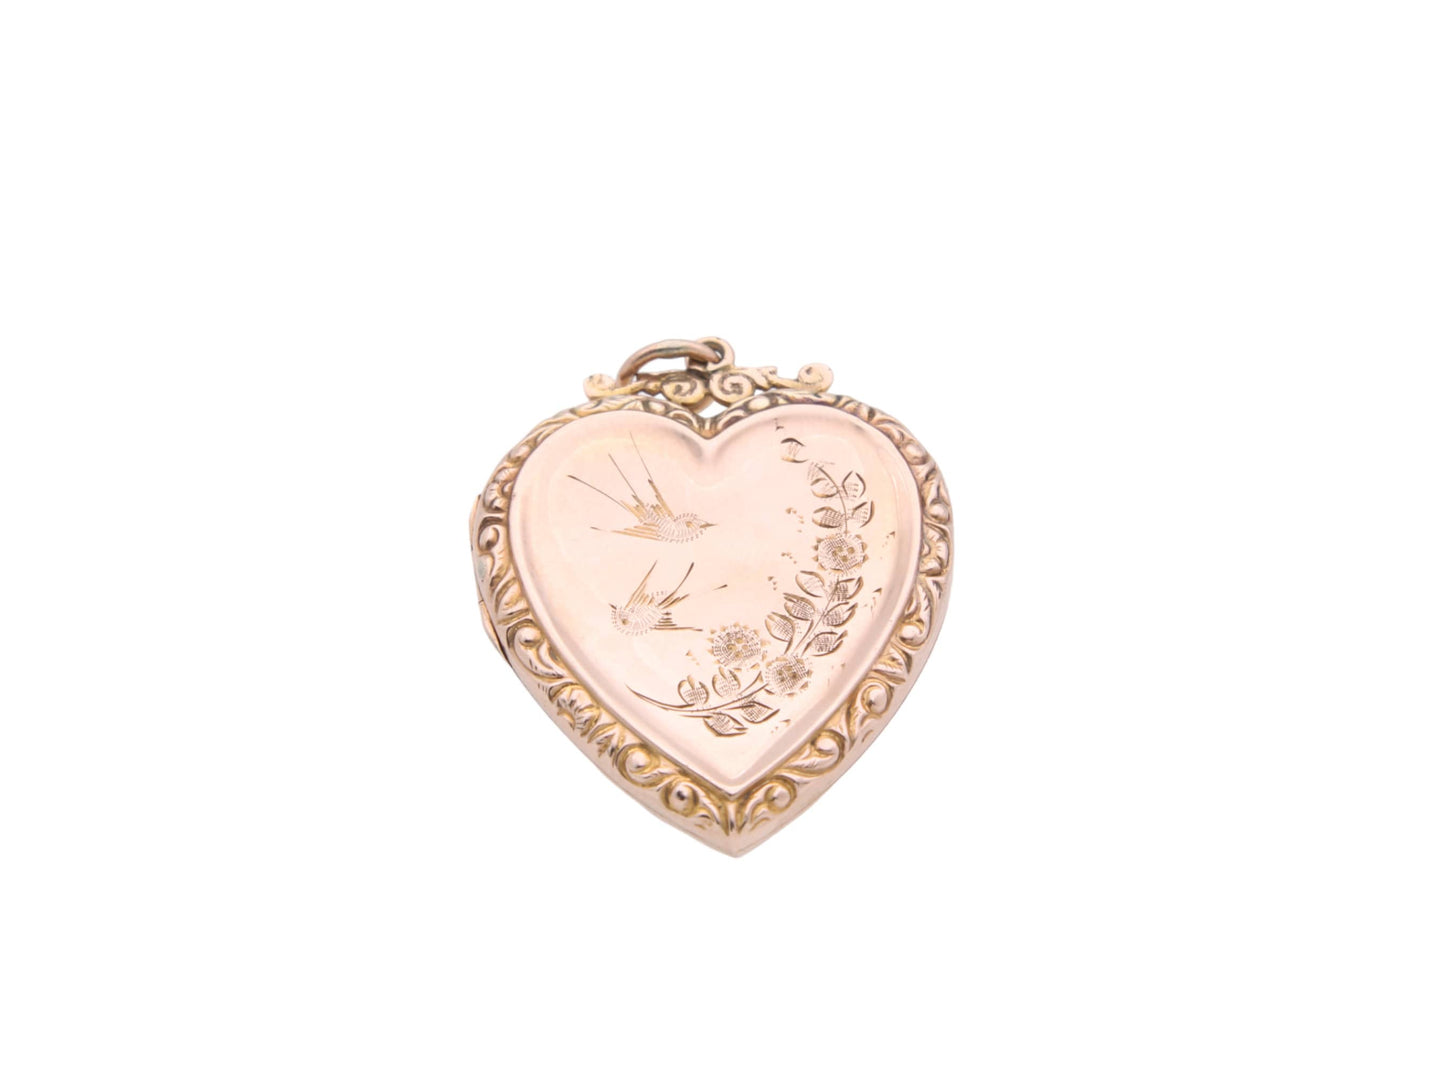 Antique 9ct Gold Large Decorative Heart Shaped Swallow Locket